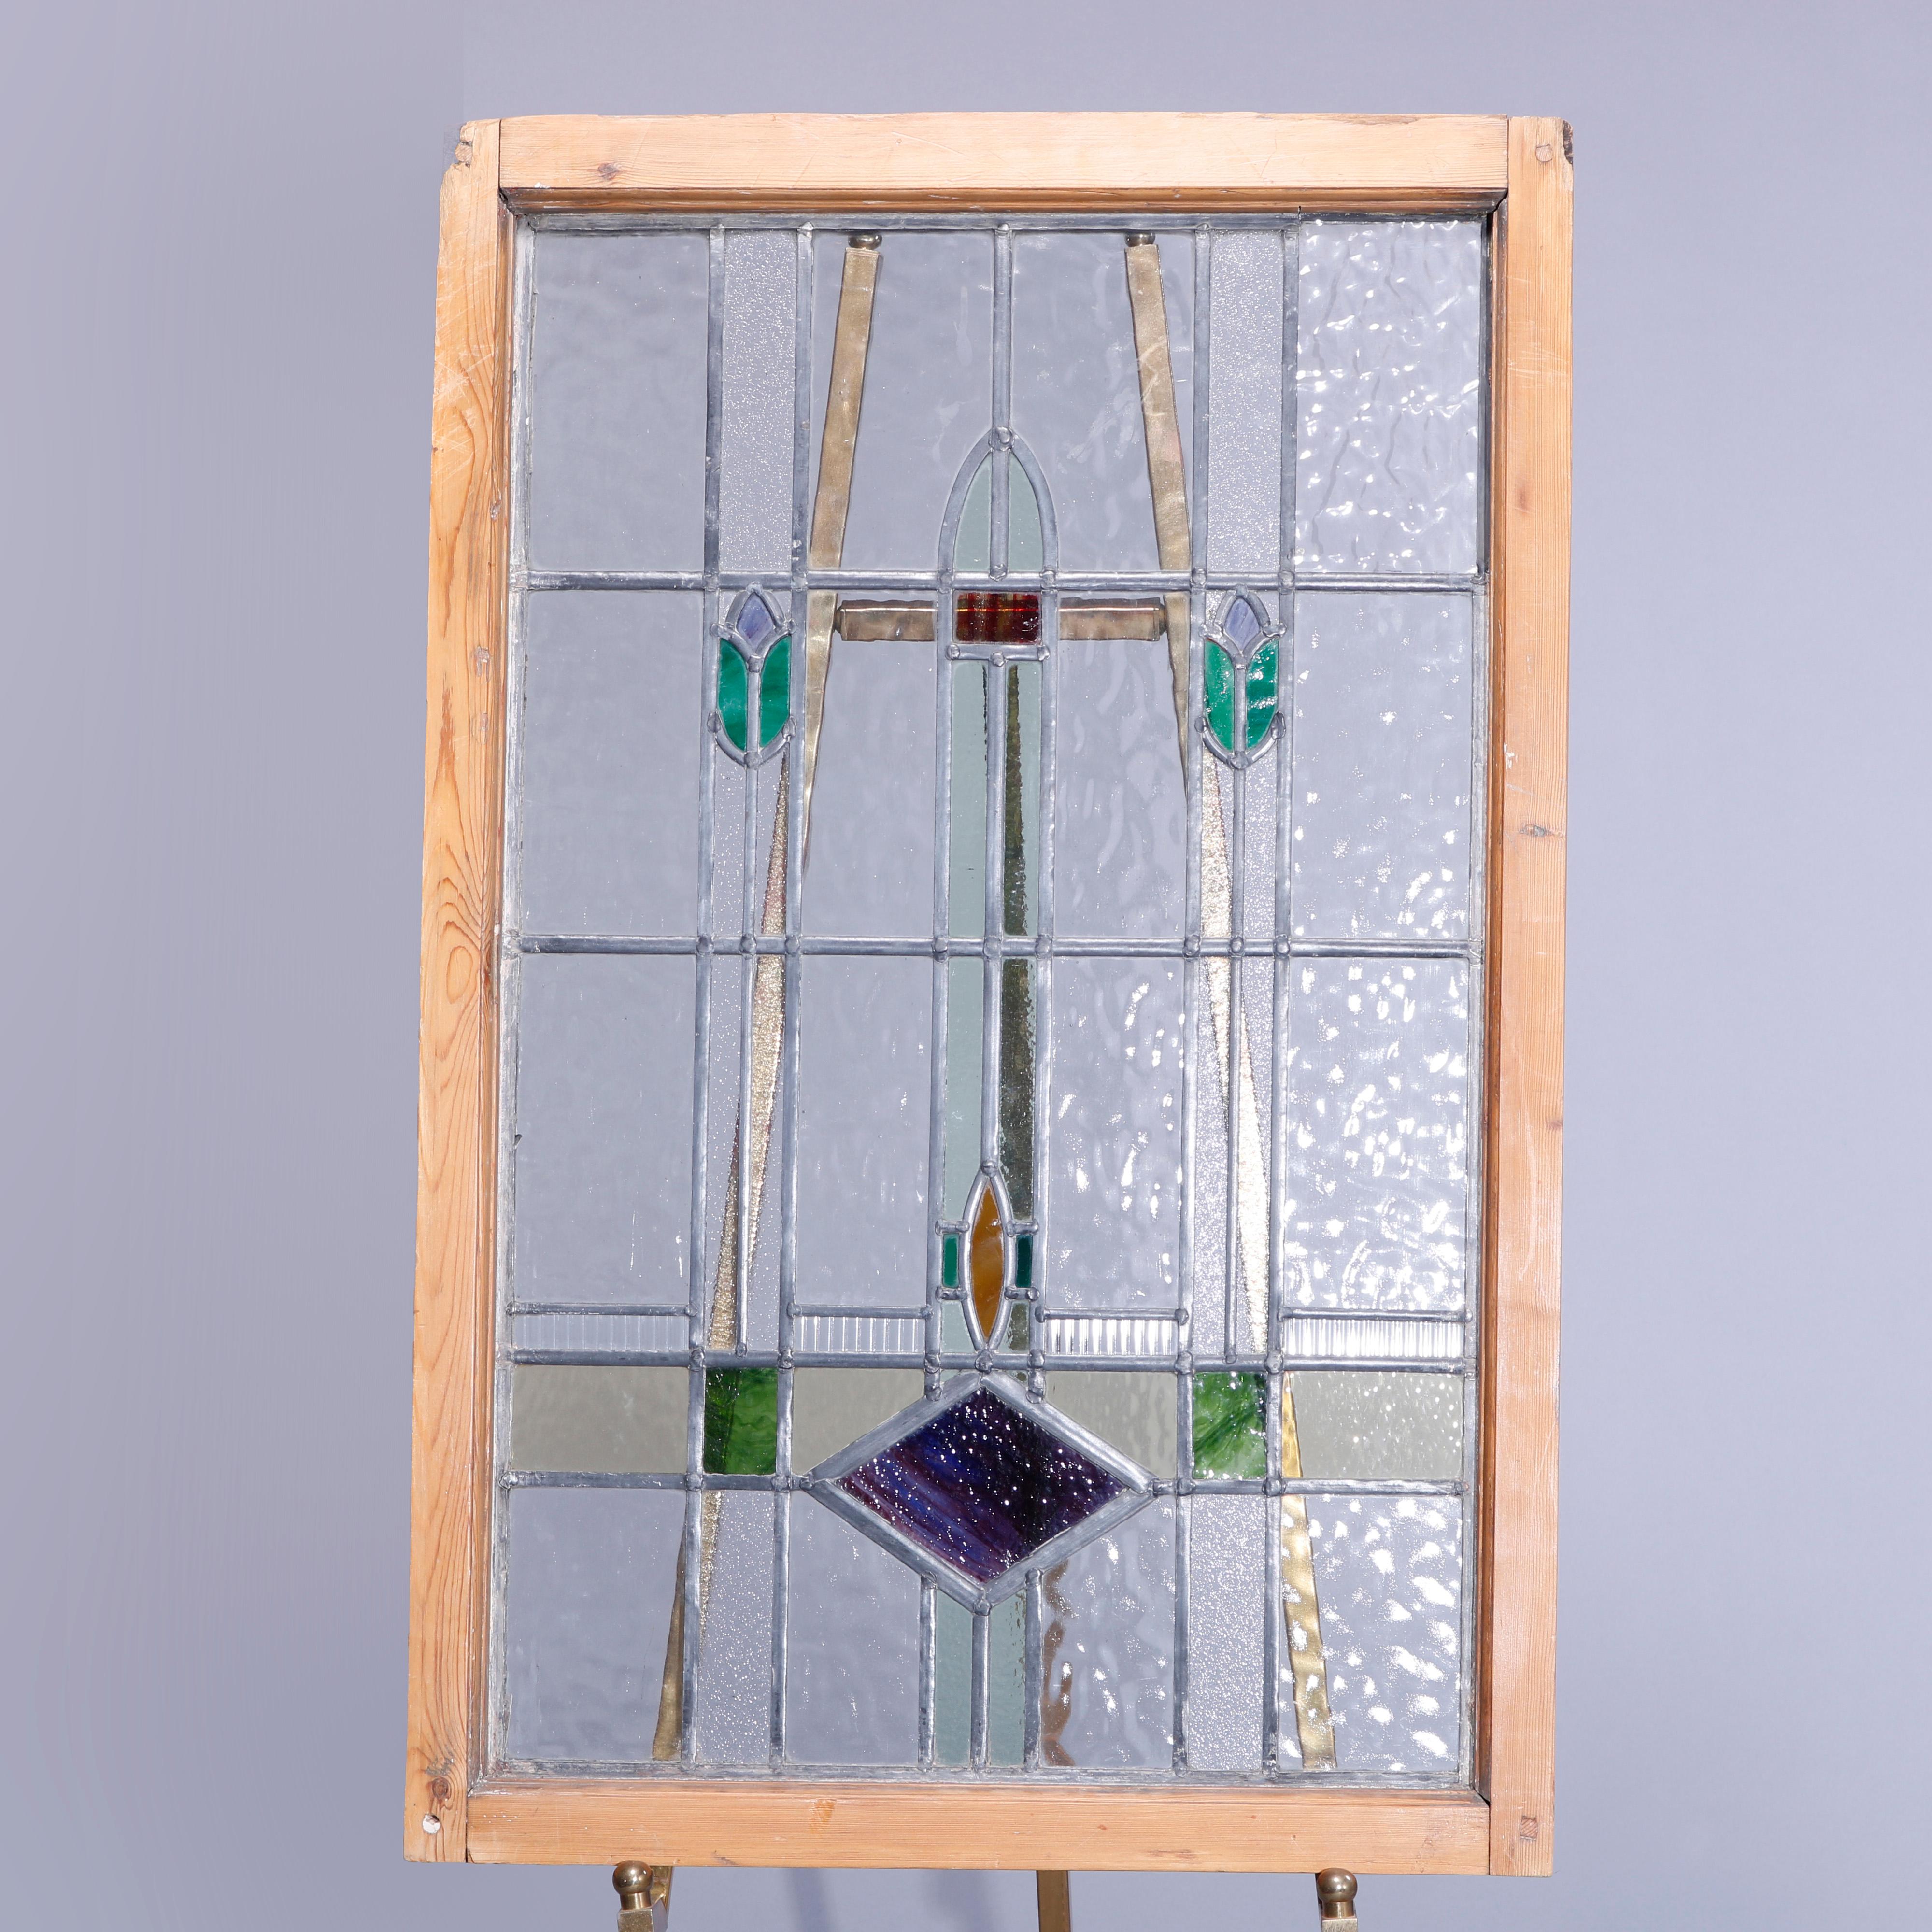 An antique Arts & Crafts leaded stained glass window panel offers geometric and stylized foliate elements seated in wood frame, c1915

Measures - 36.5''h x 23.75''w x 1.75''d.